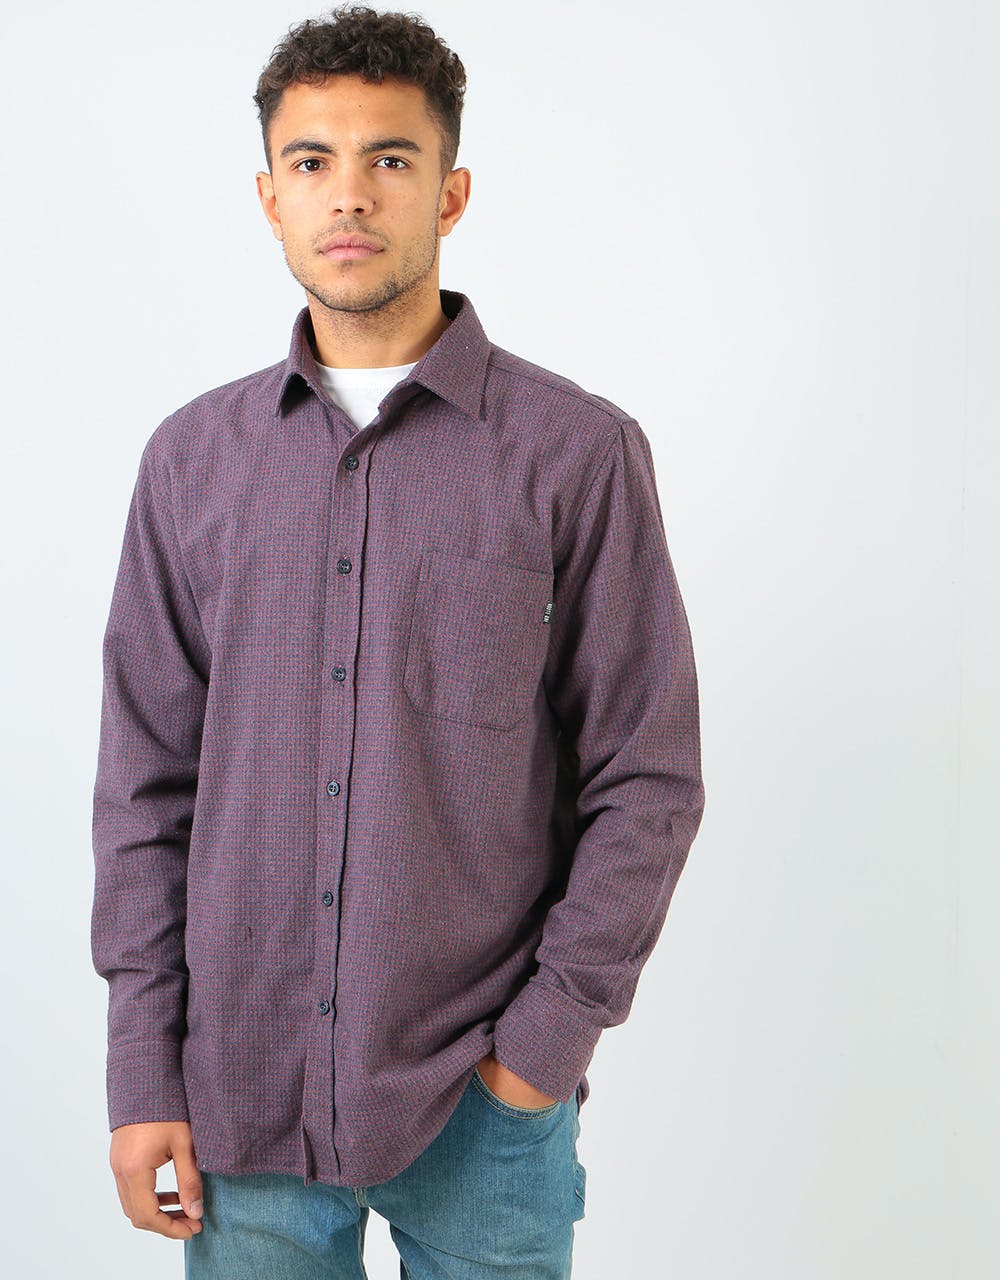 Route One Hounds Flannel Shirt - Cardinal